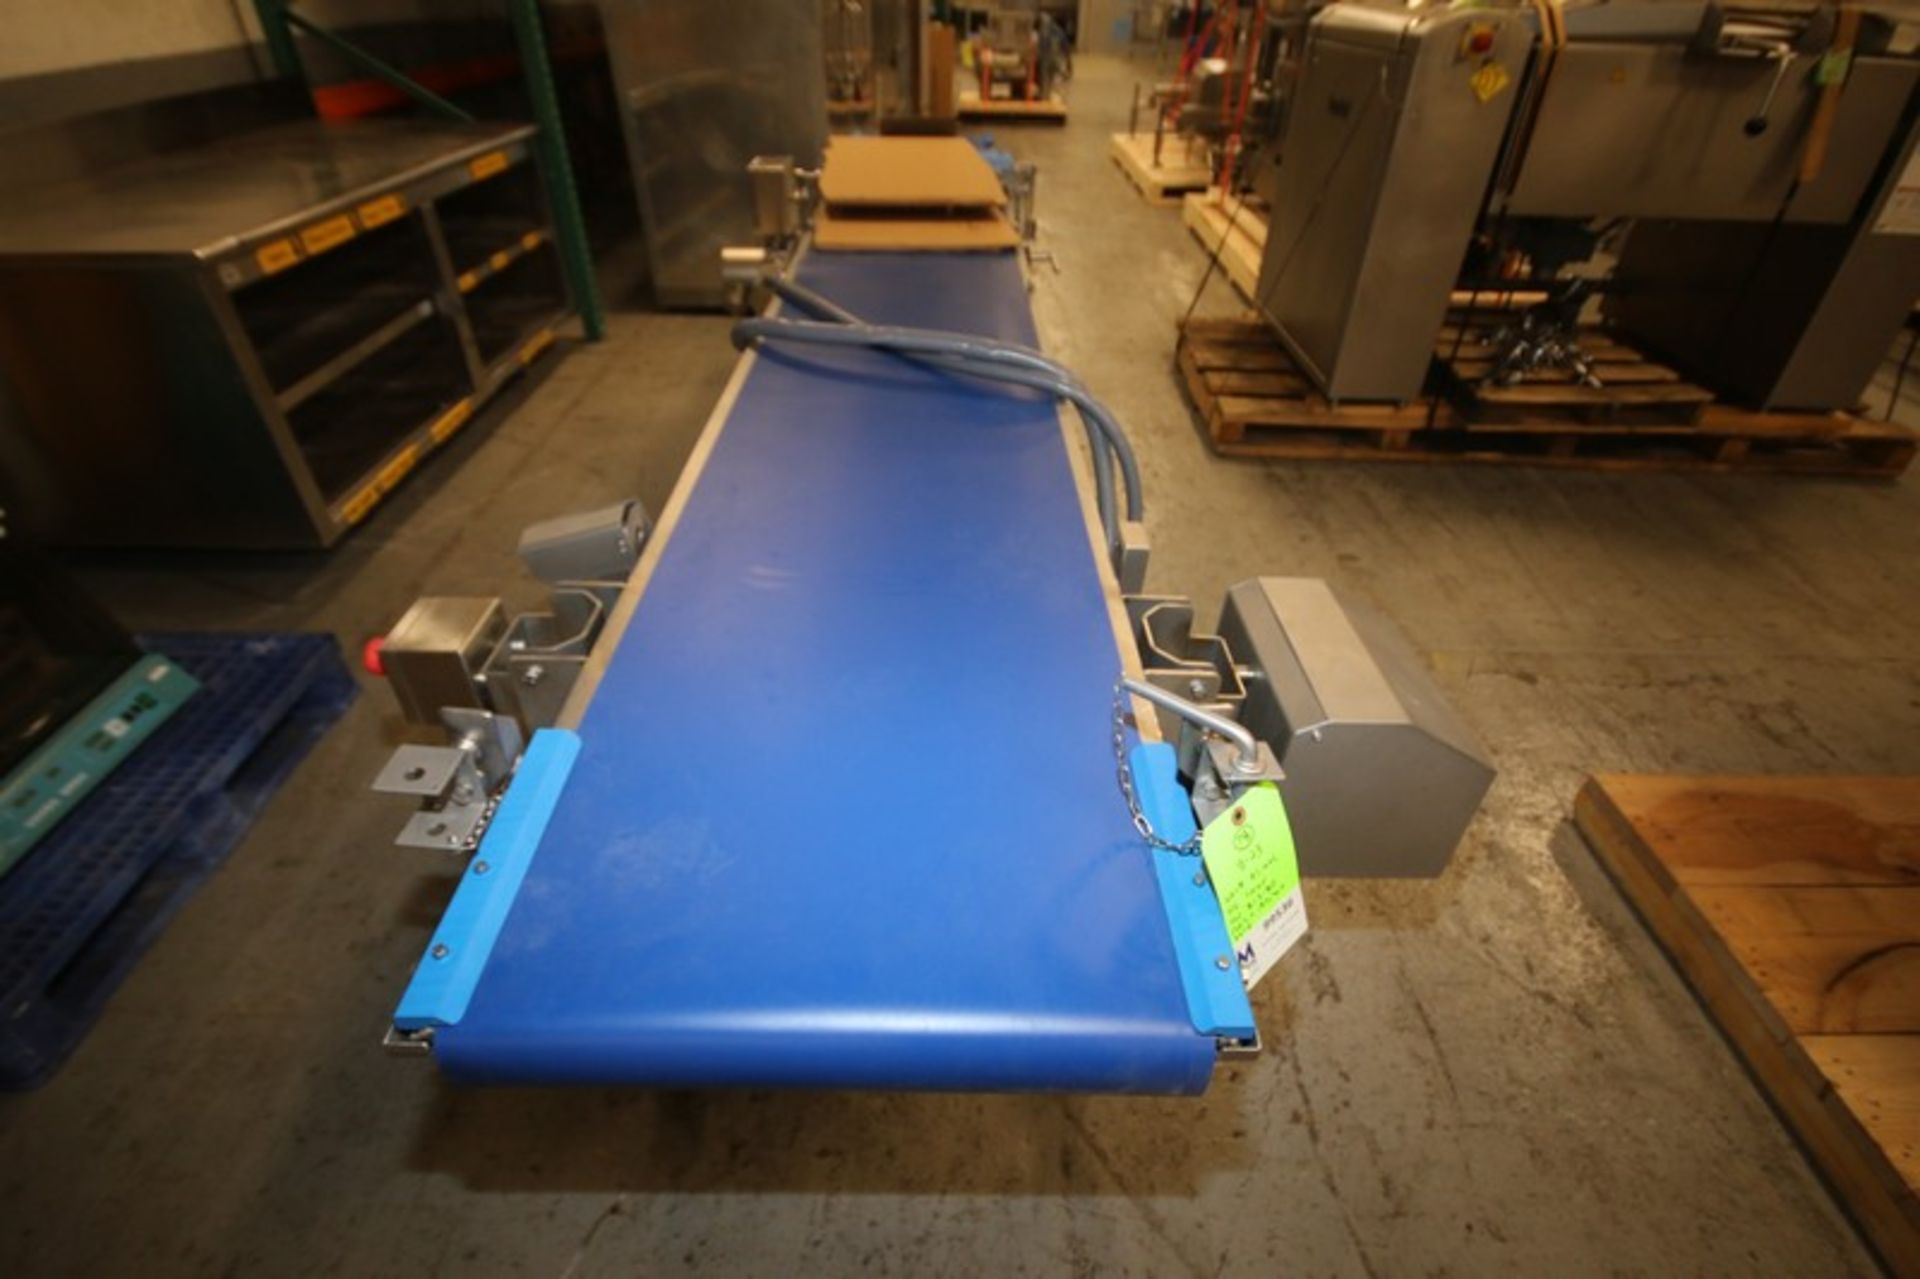 2019 Alimec Aprox. 150" L x 19 1/2" W x 34" H S/S Belt Conveyor, SN 813-80, with Bauer S/S Drive - Image 2 of 5